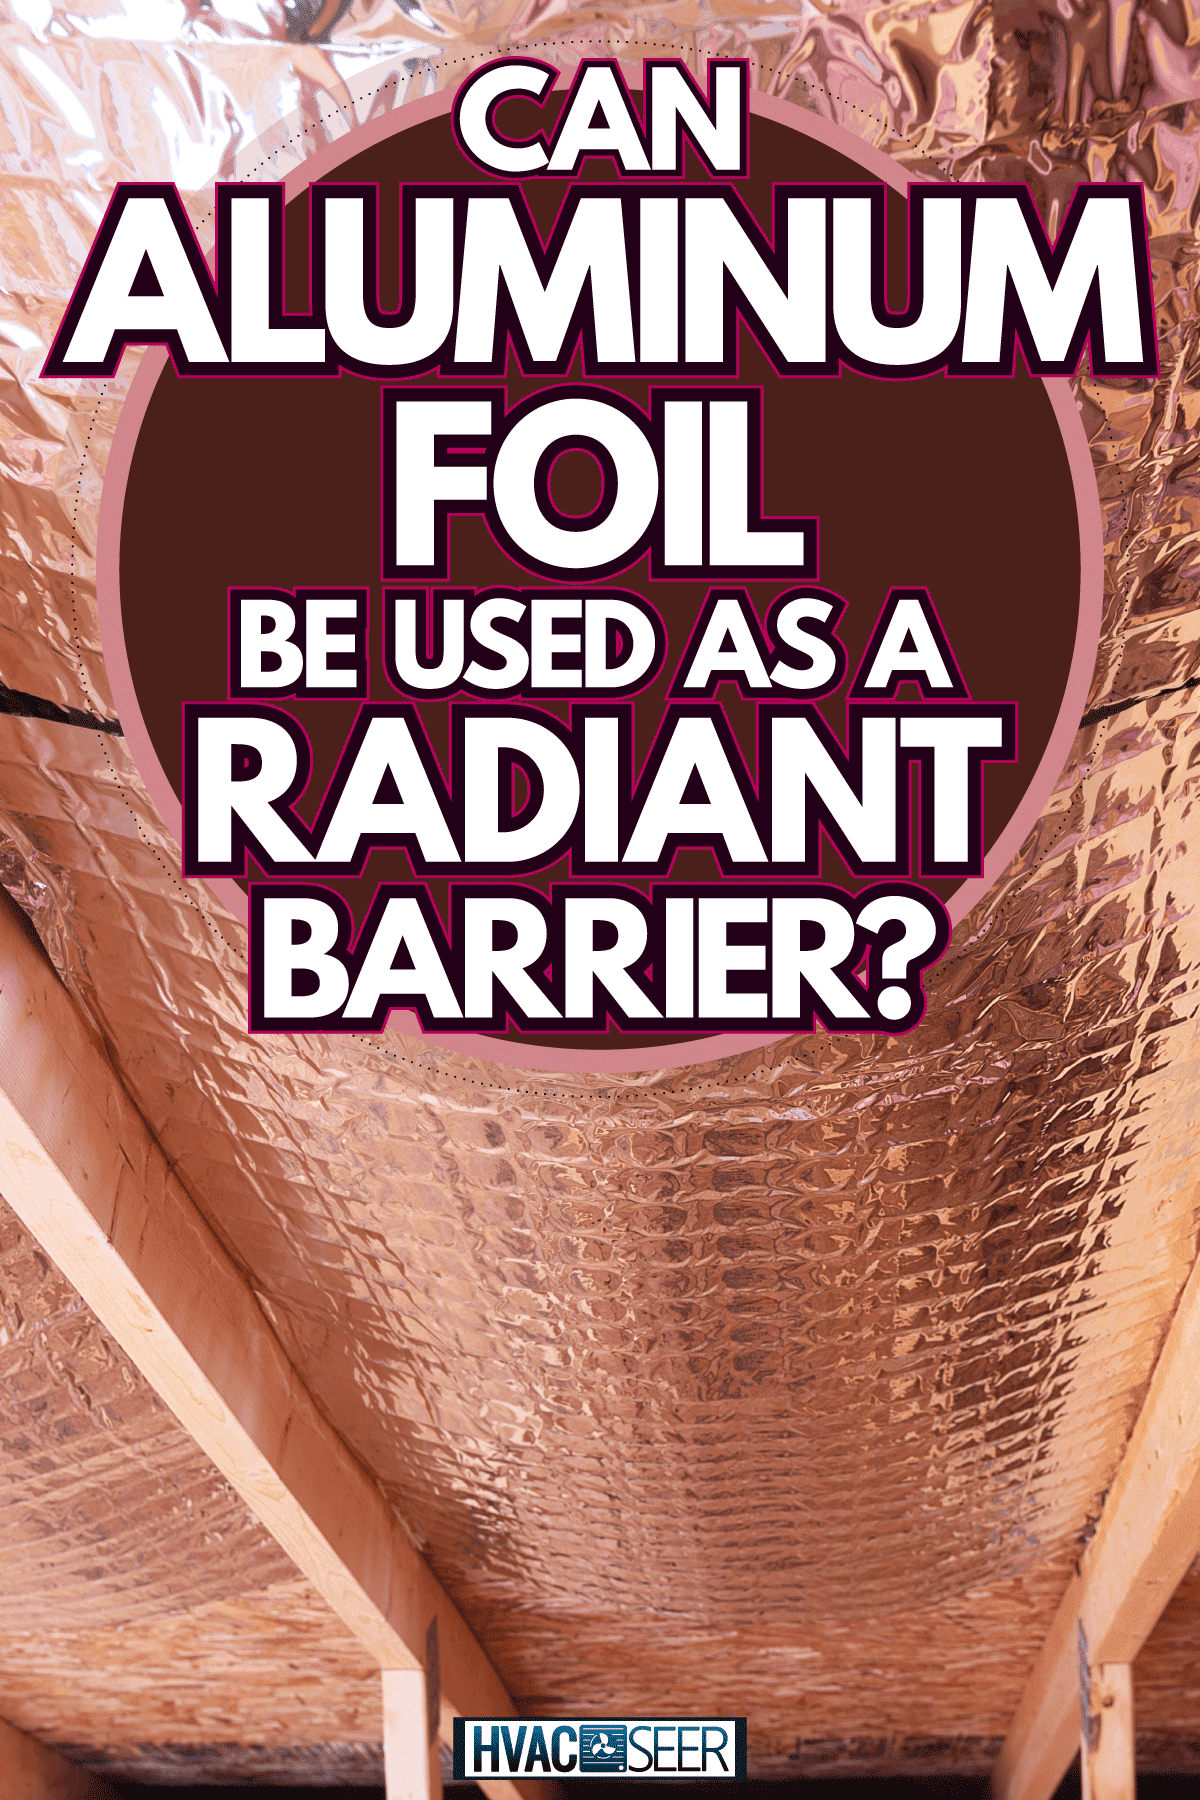 Radiant barrier located at the ceiling of a house, Can Aluminum Foil Be Used As A Radiant Barrier?